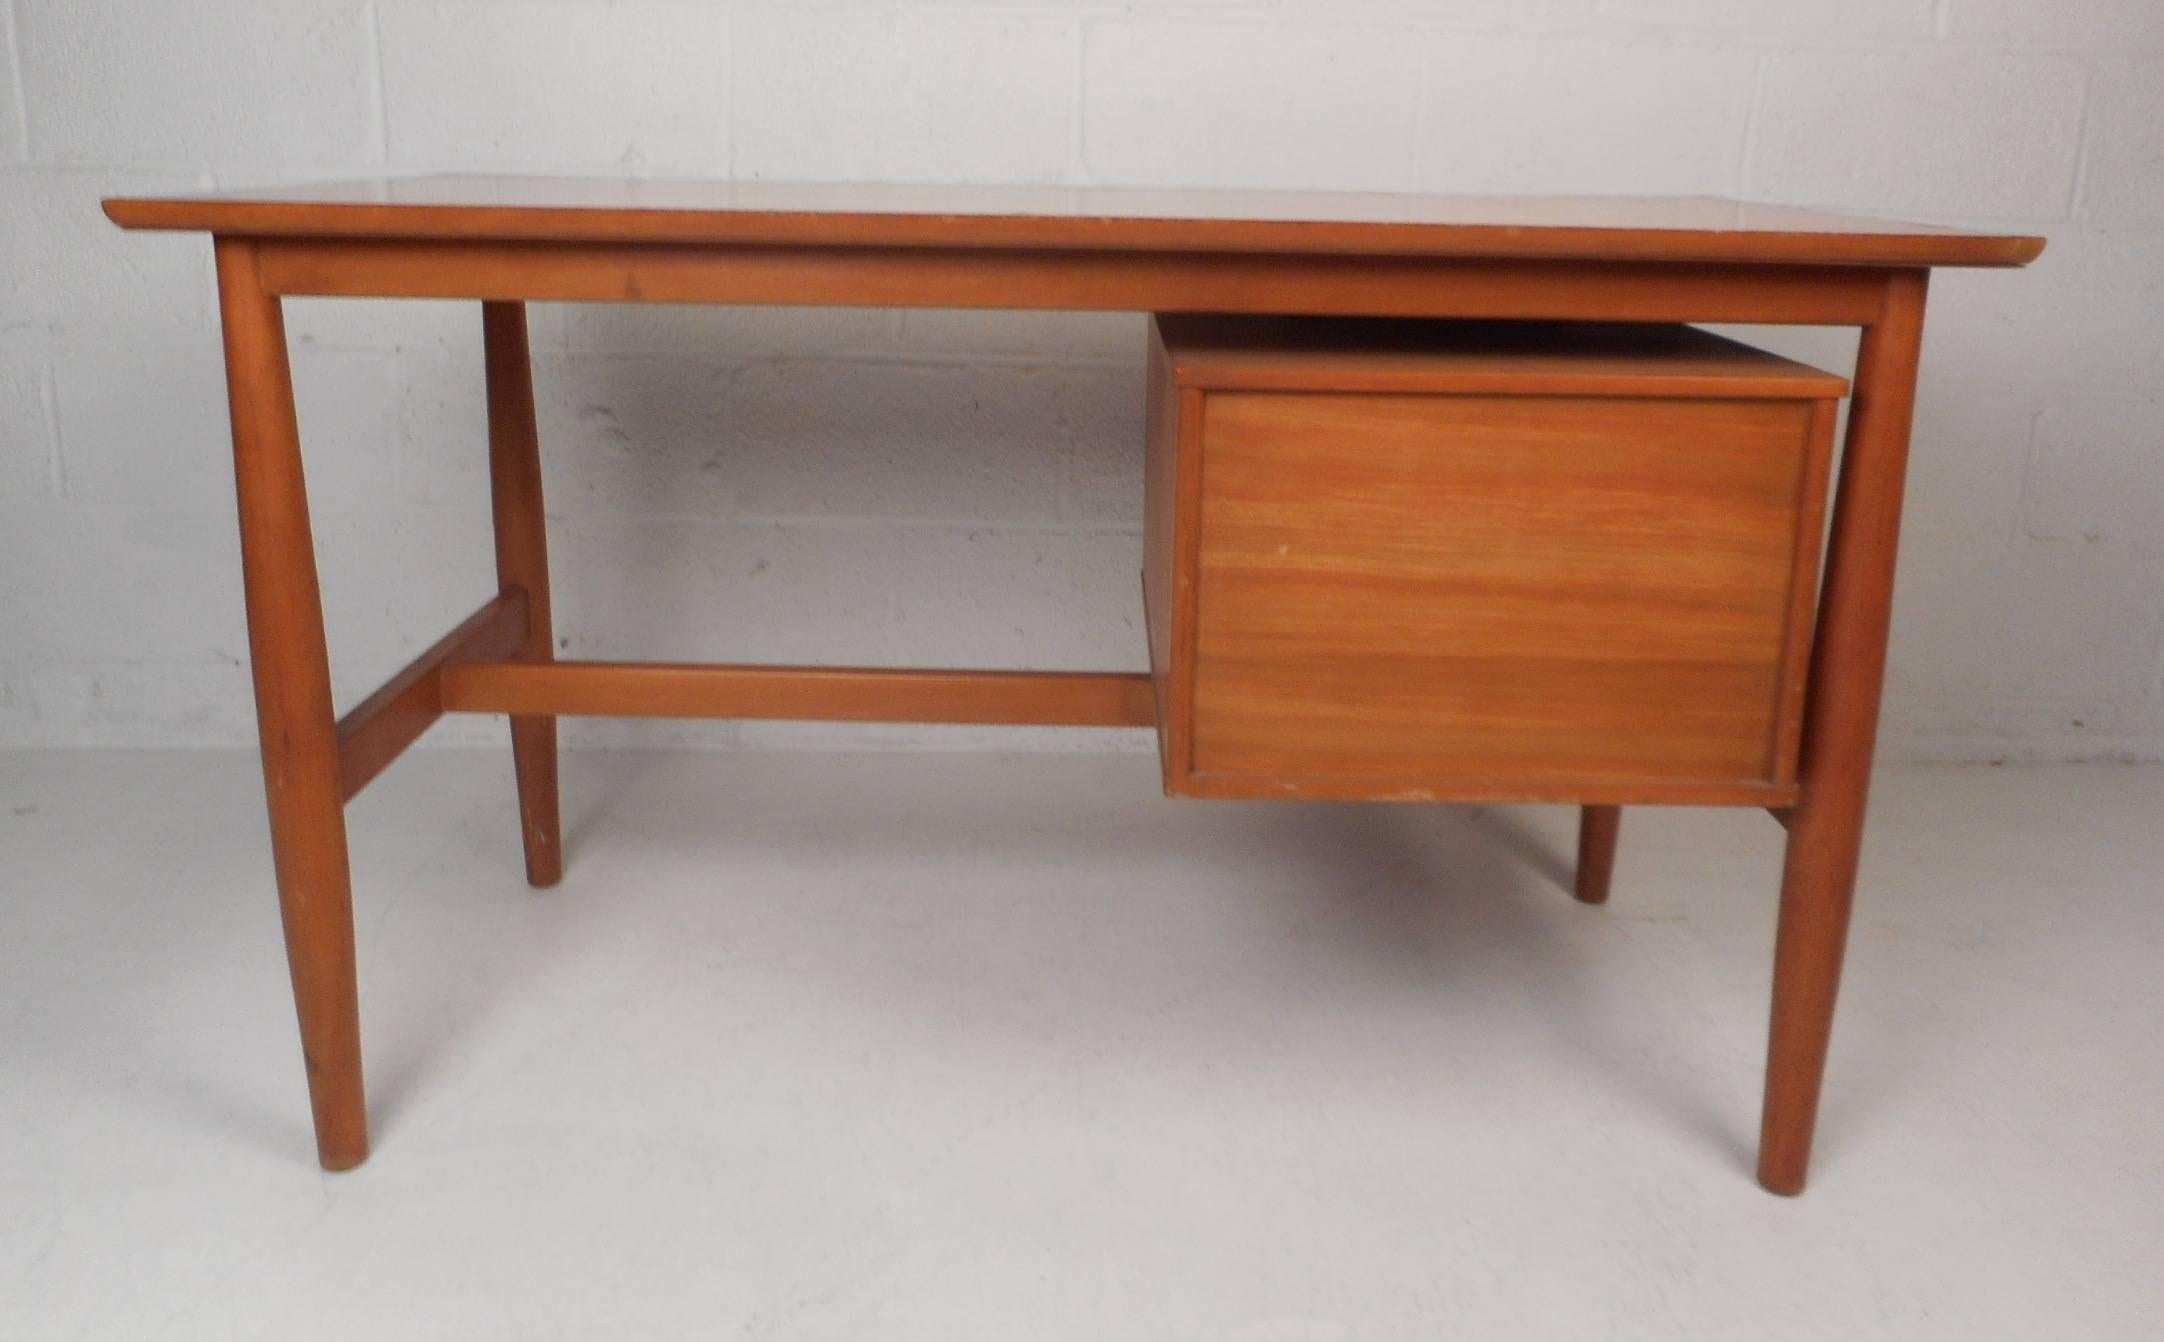 North American Vintage Modern Desk with a Finished Back by Drexel